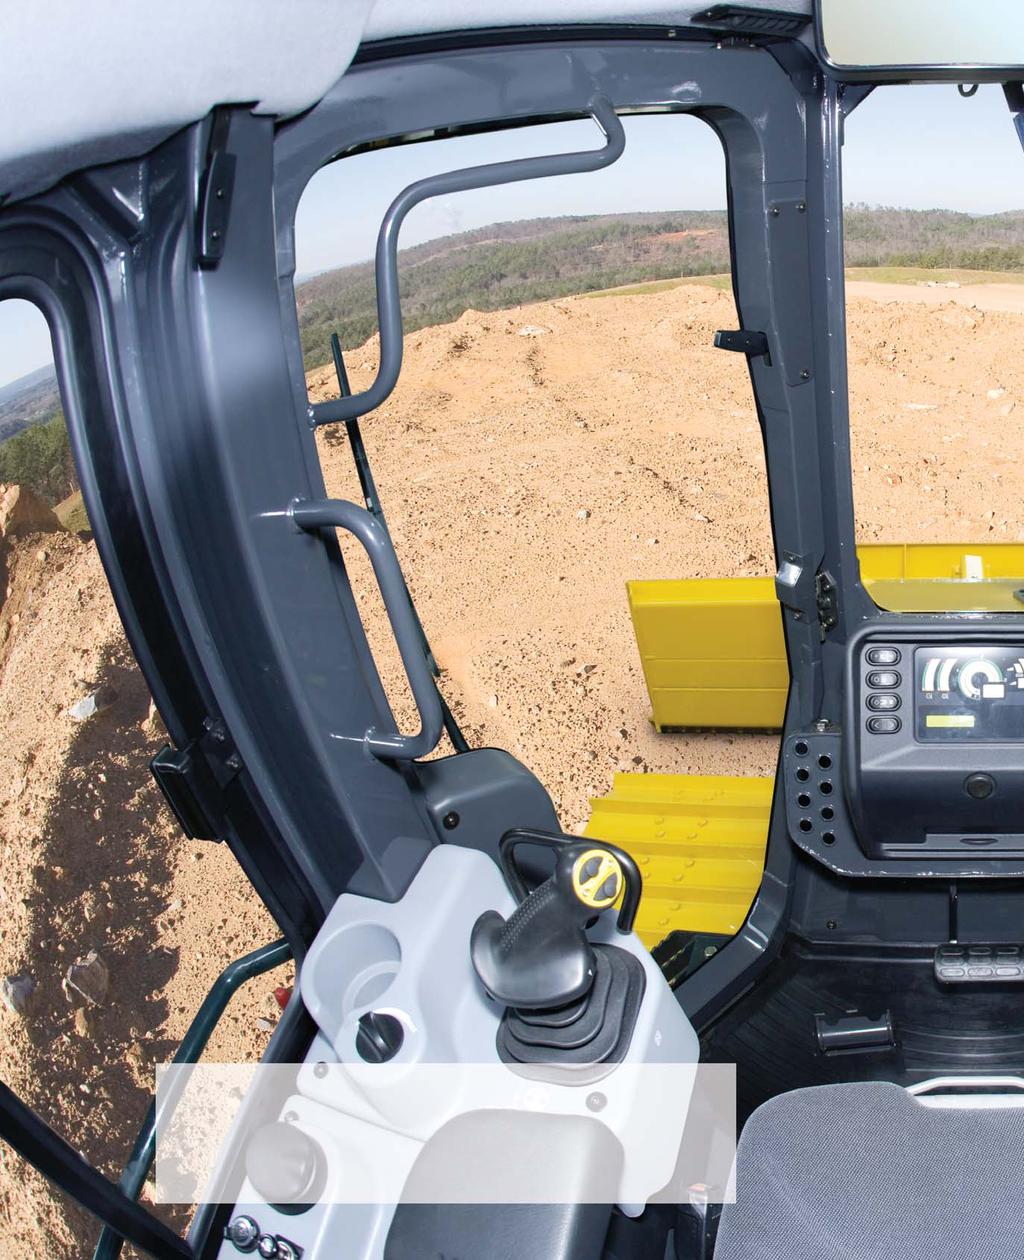 D39-22 C RAWLER D OZER Great visibility run Unrivaled blade visibility Just like the D51EX/PX-22, the D39EX/PX-22 incorporates Komatsu s super-slant